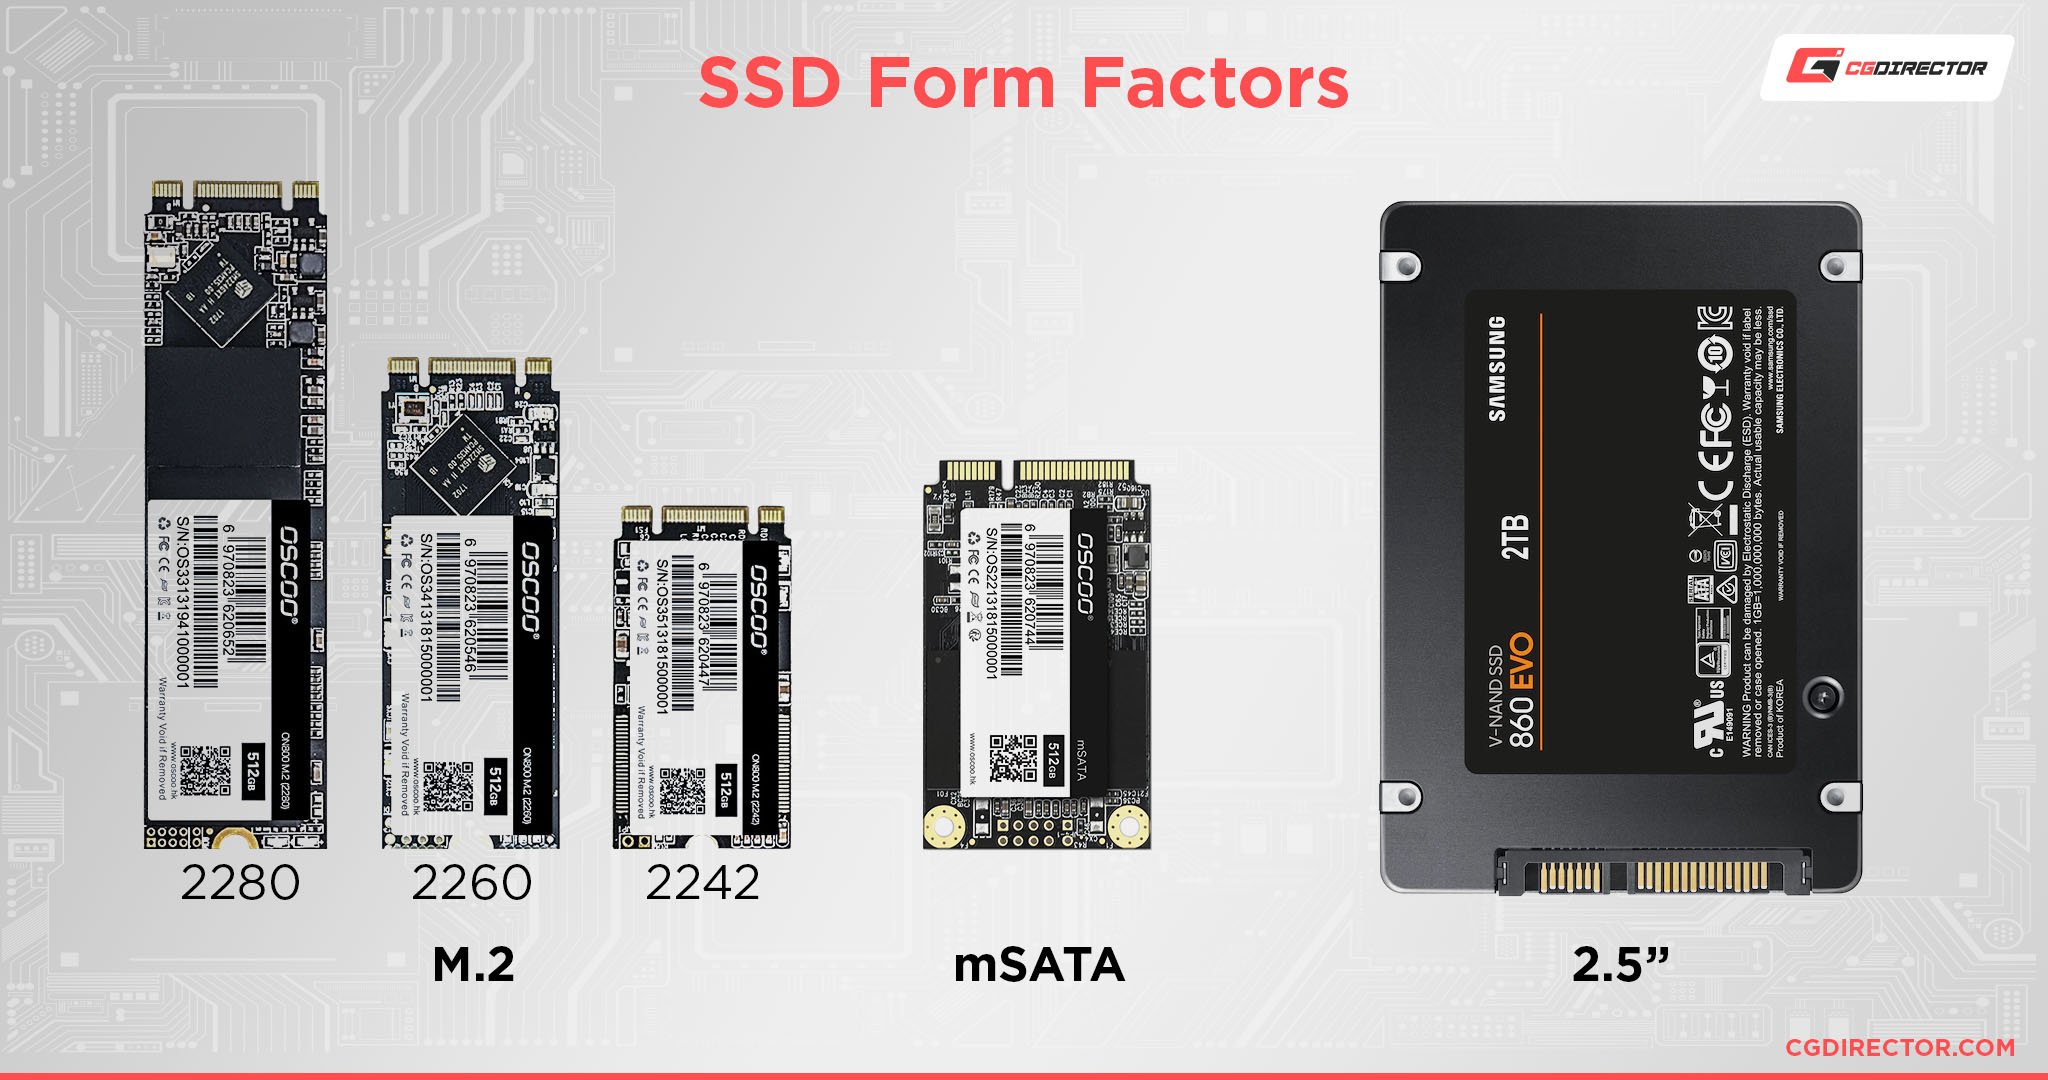 NVMe SSD - What's Difference?